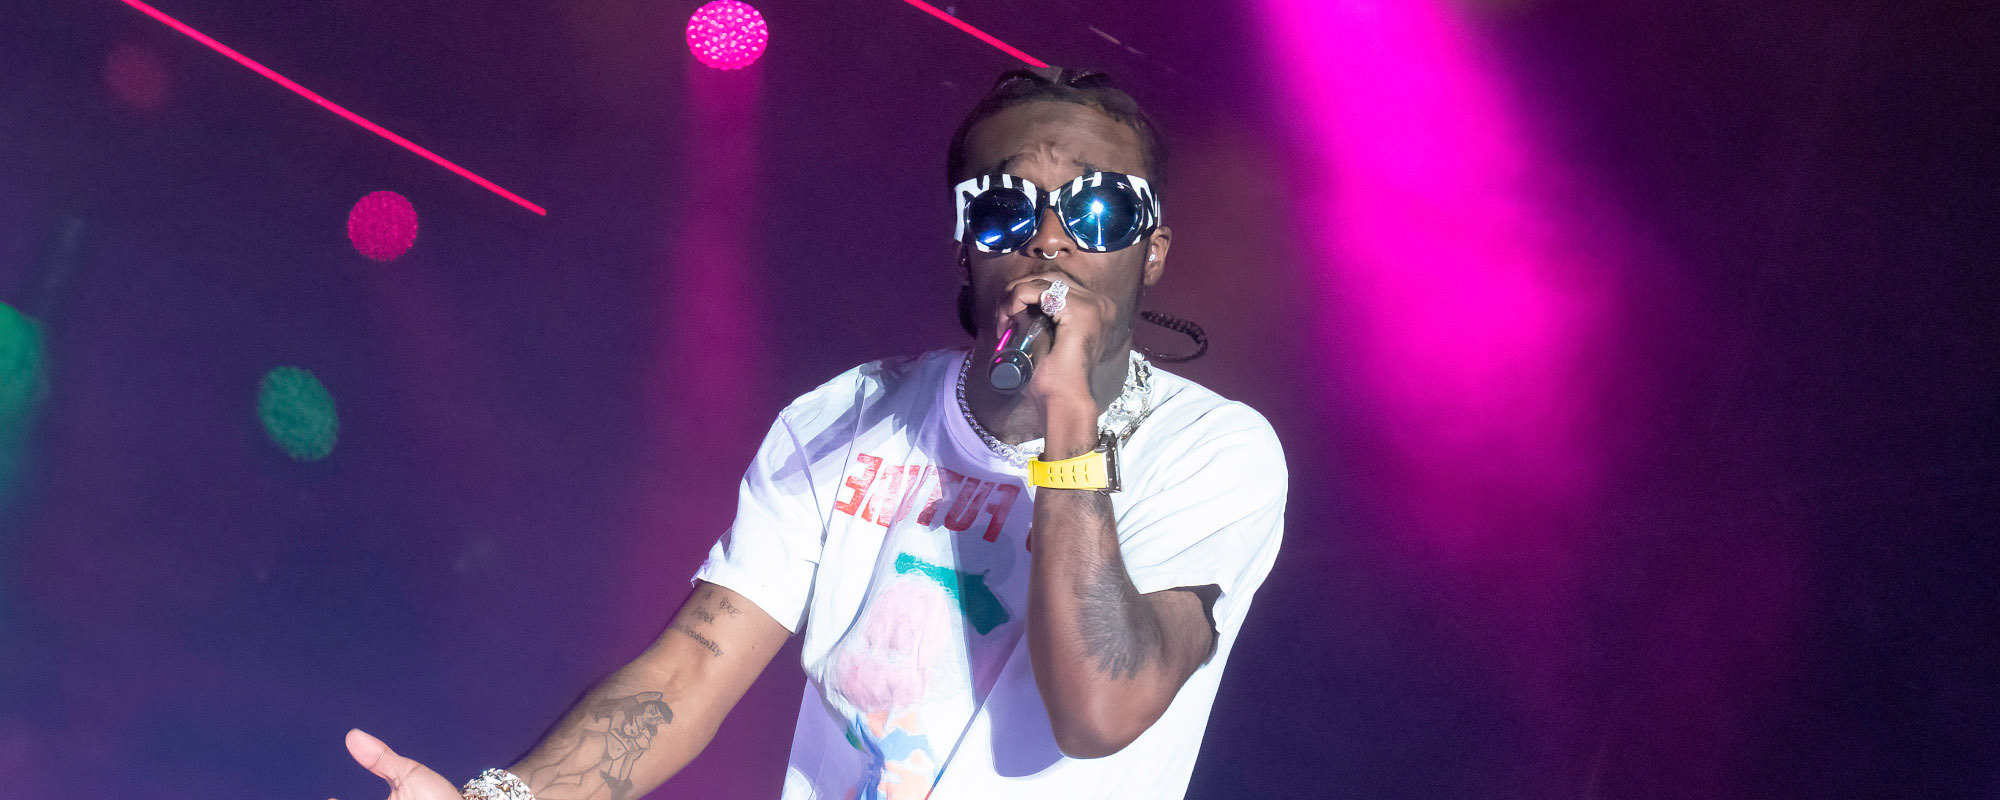 Lil Uzi Vert Reveals Trailer and Cover Art for ‘Pink Tape’